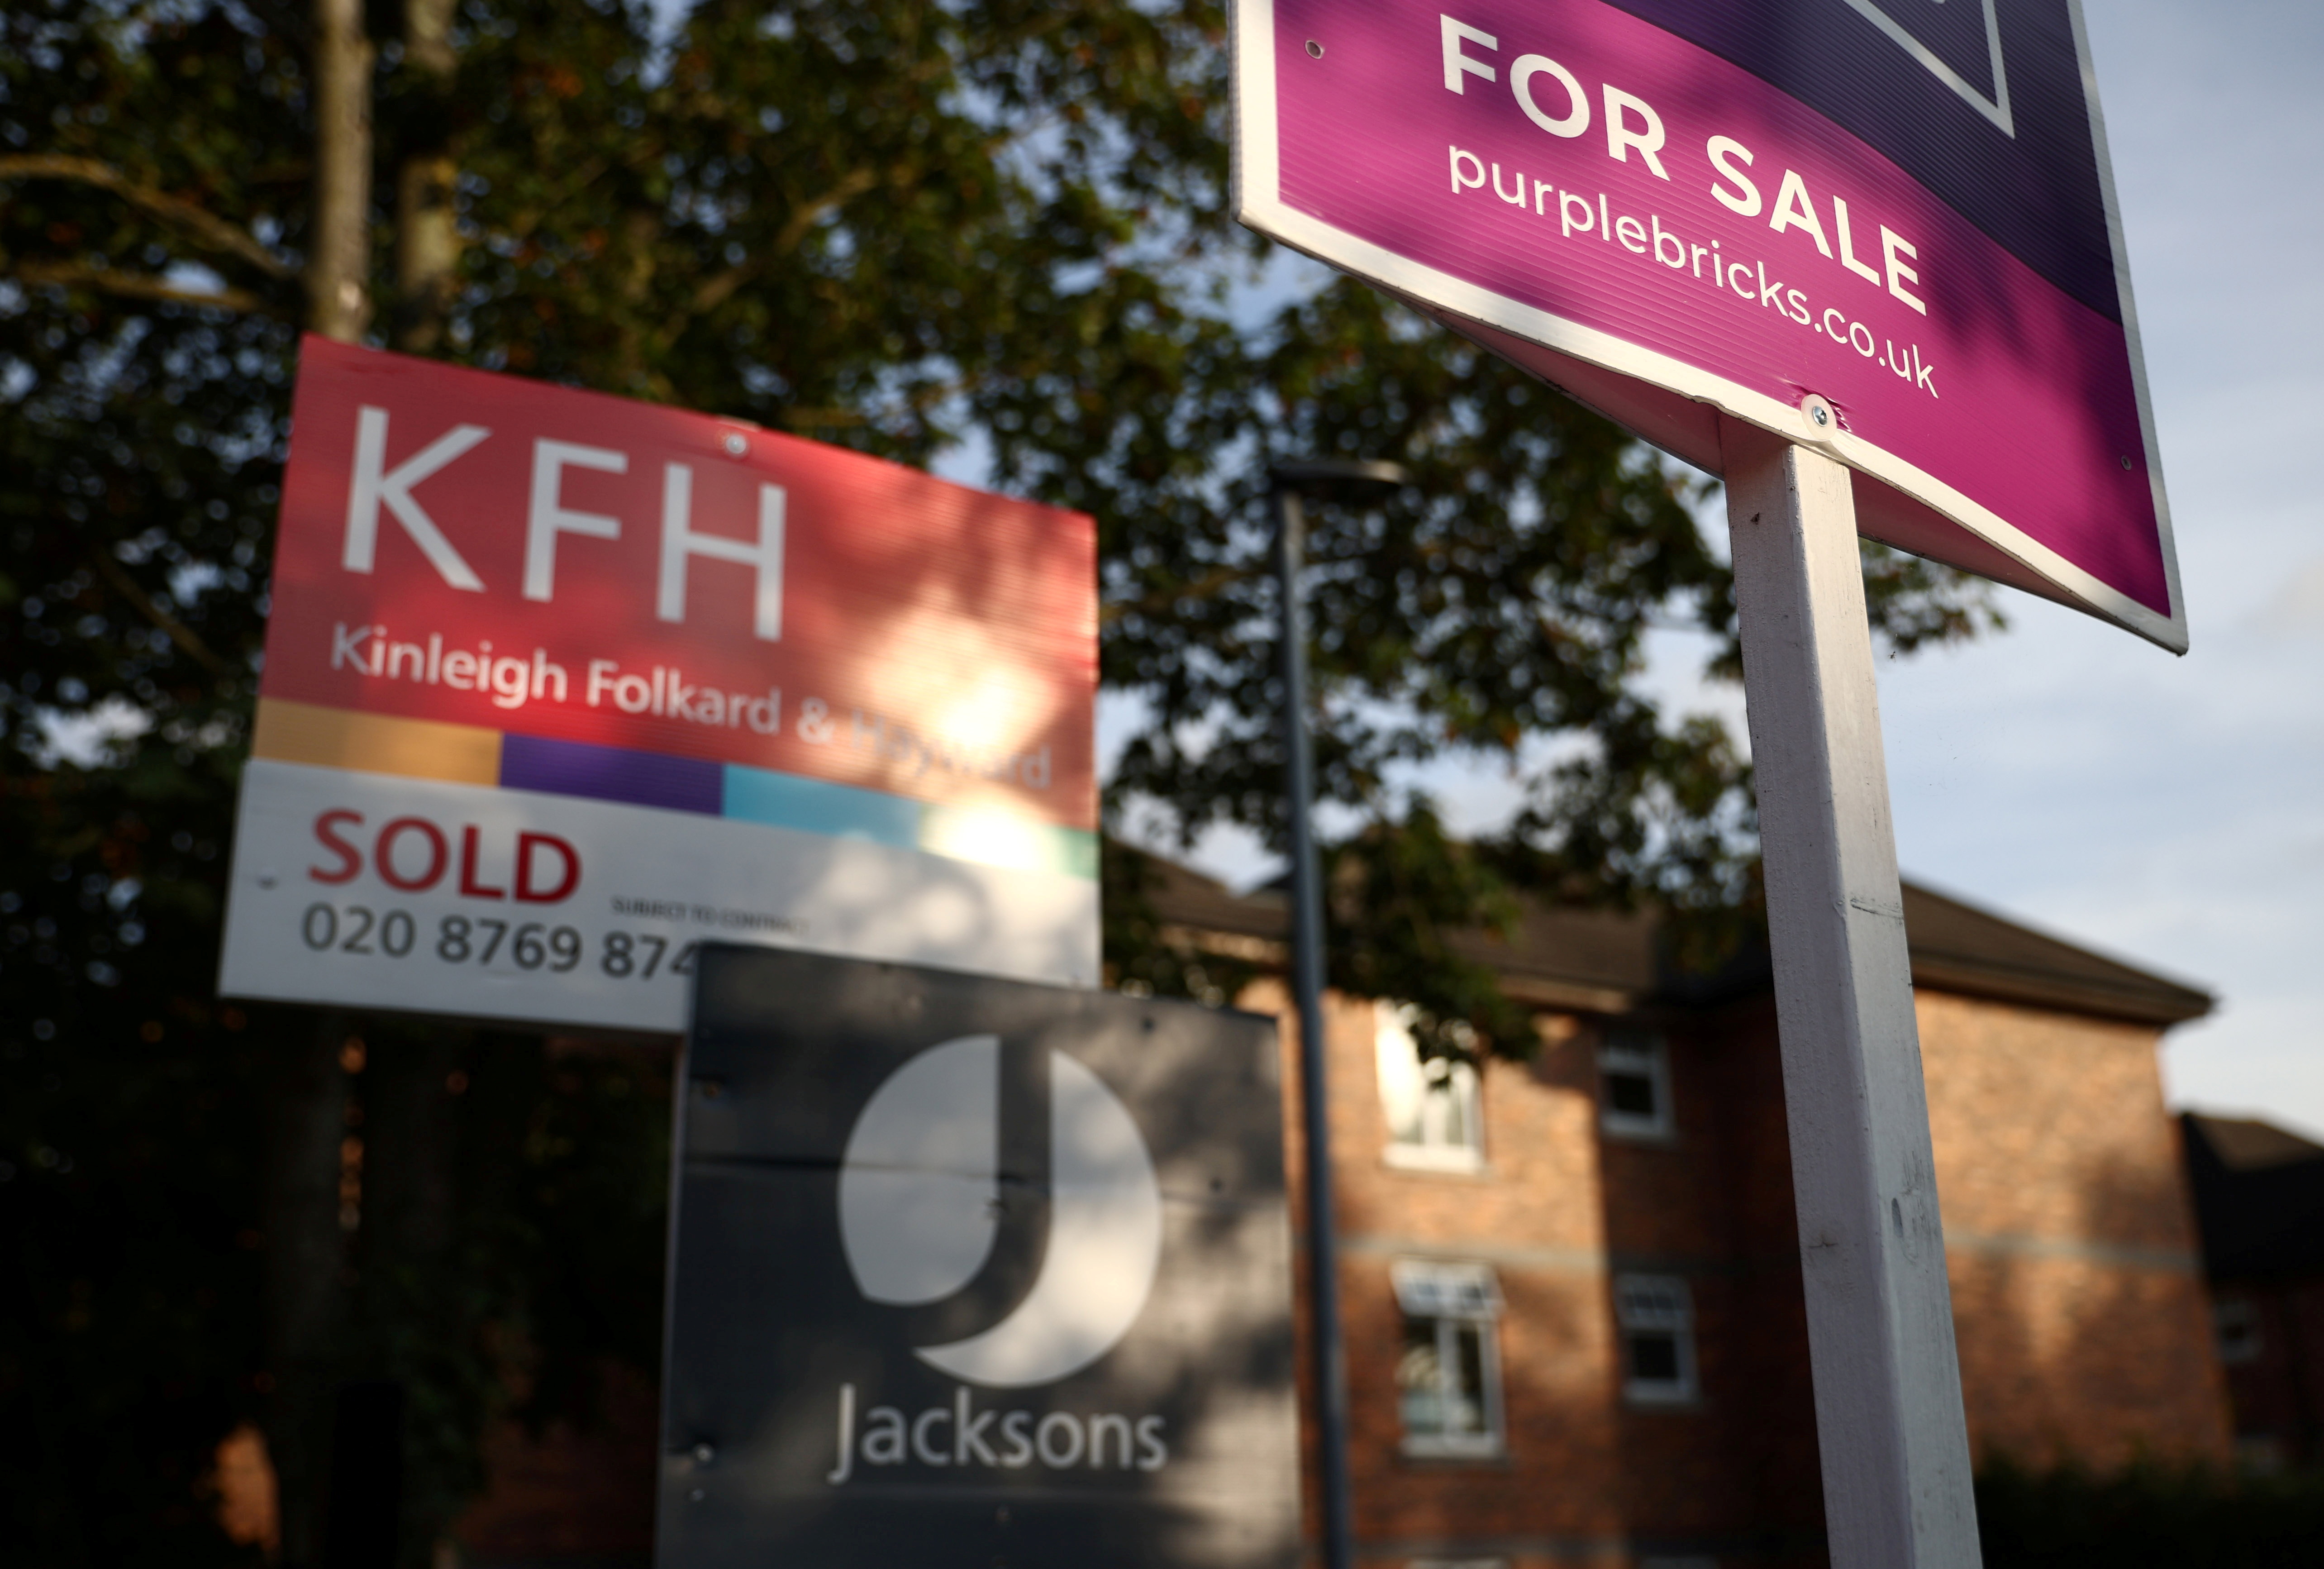 Property estate agent sales and letting signs are seen attached to railings outside an apartment building in south London, Britain, September 23, 2021. REUTERS/Hannah McKay/File Photo